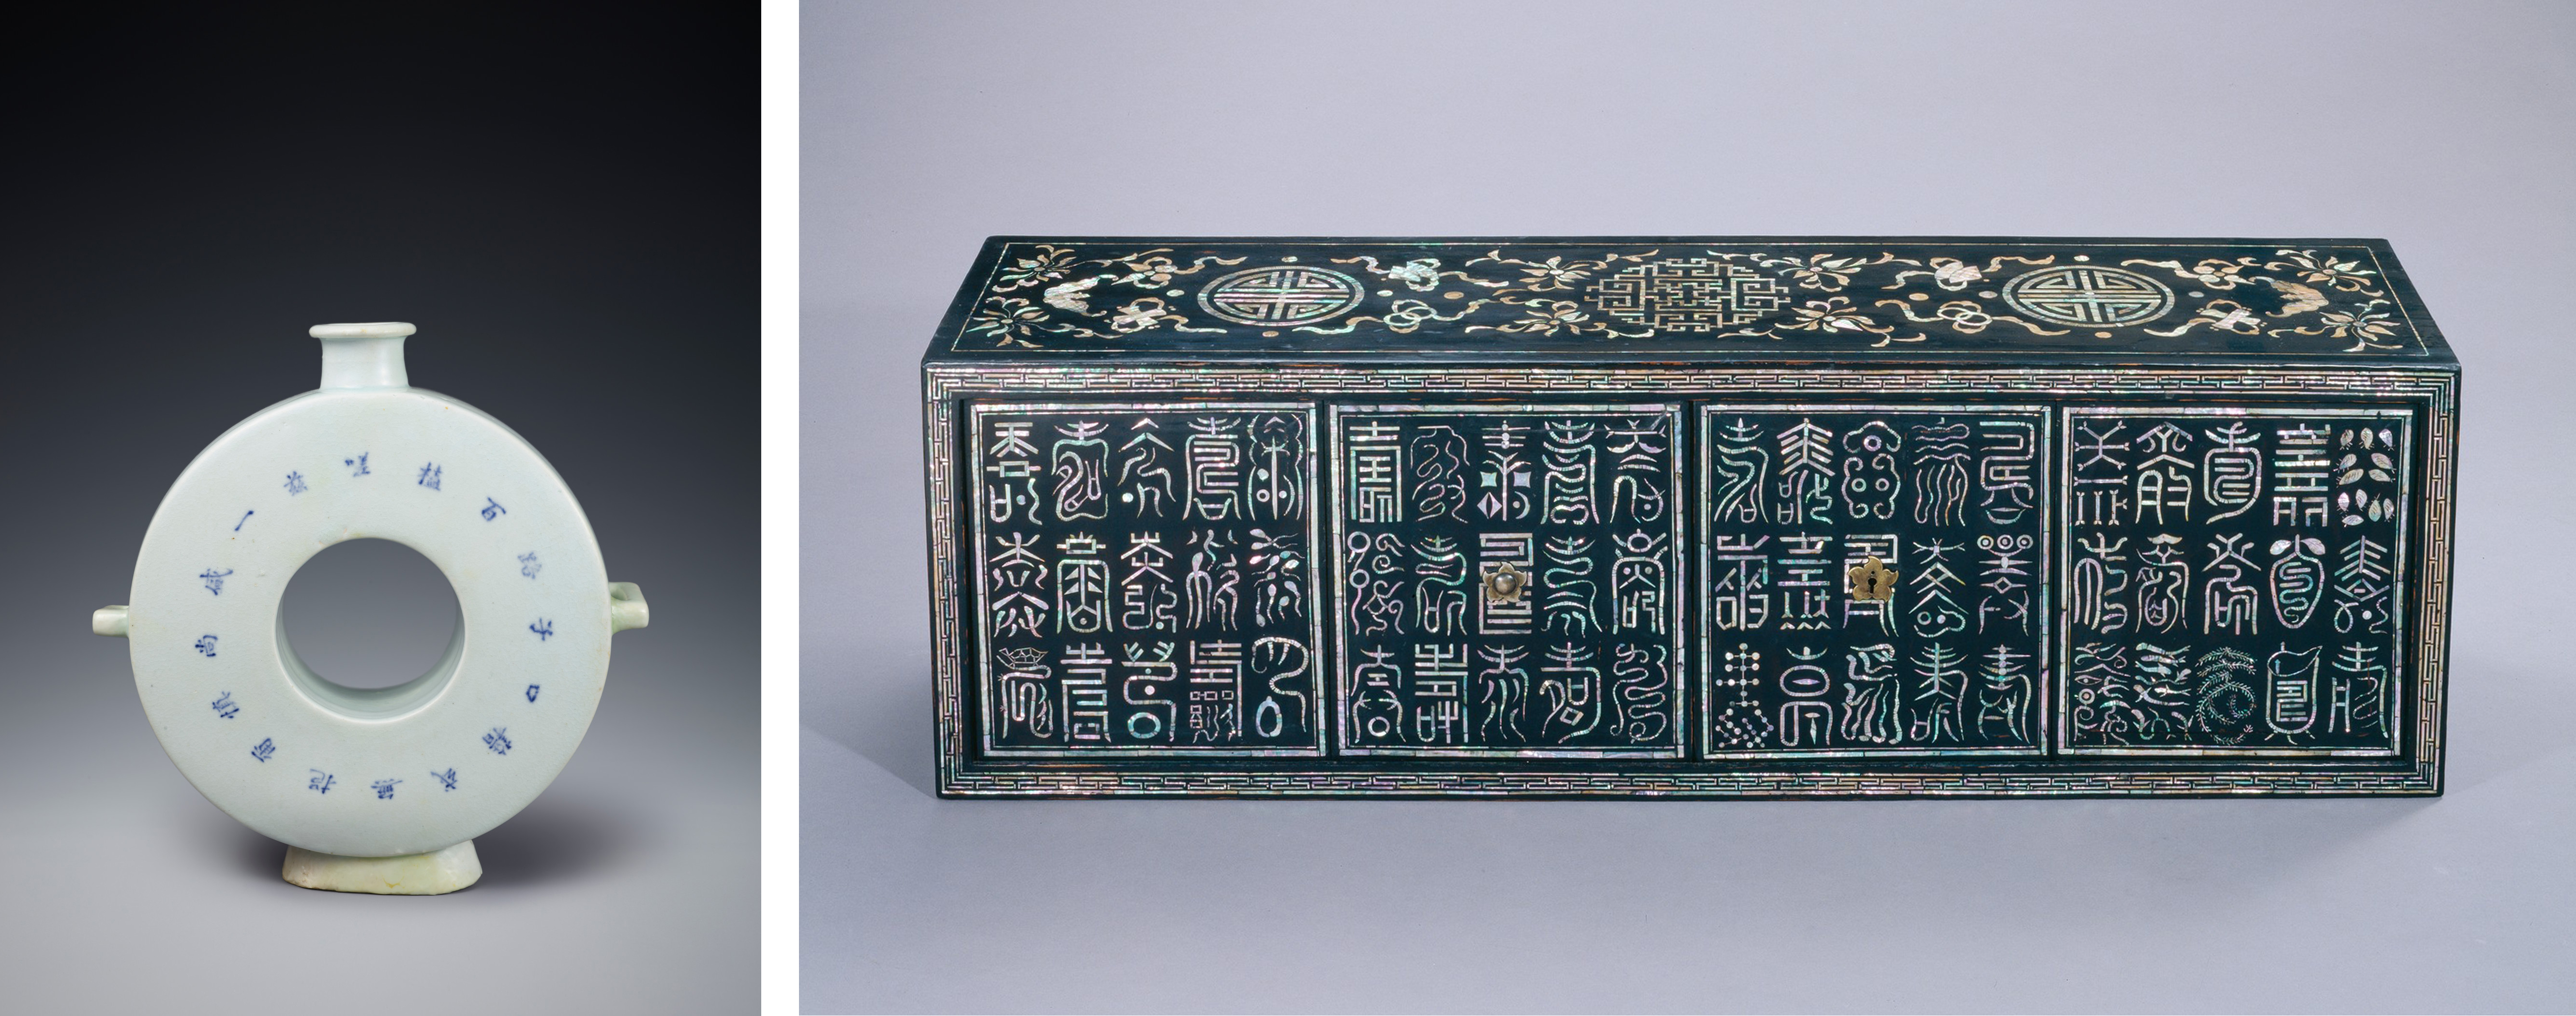 Left: Unknown, White porcelain flat bottle with poem, Korean, 18th–19th century, Leeum, Samsung Museum of Art, photo courtesy Leeum, Samsung Museum of Art; Right: Unknown, Lacquered Chest with Mother of Pearl, Korean, 1392–1897, National Museum of Korea, Korea, Seoul (duk001835), photo courtesy National Museum of Korea